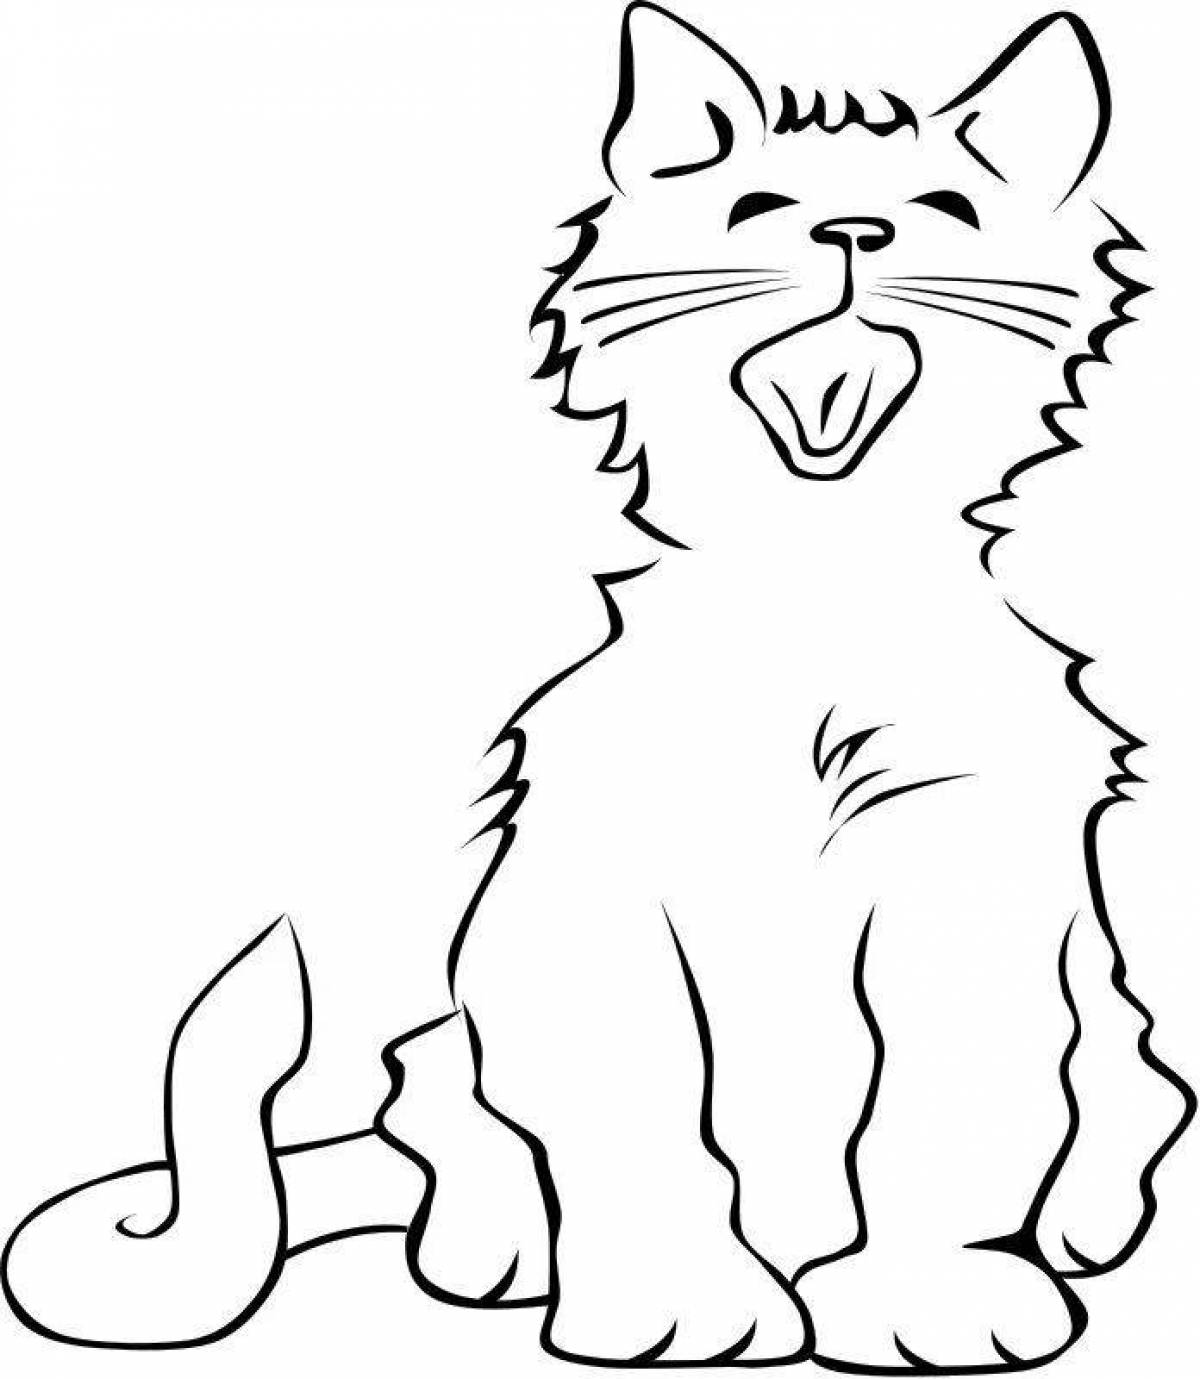 Cunning black cat coloring page